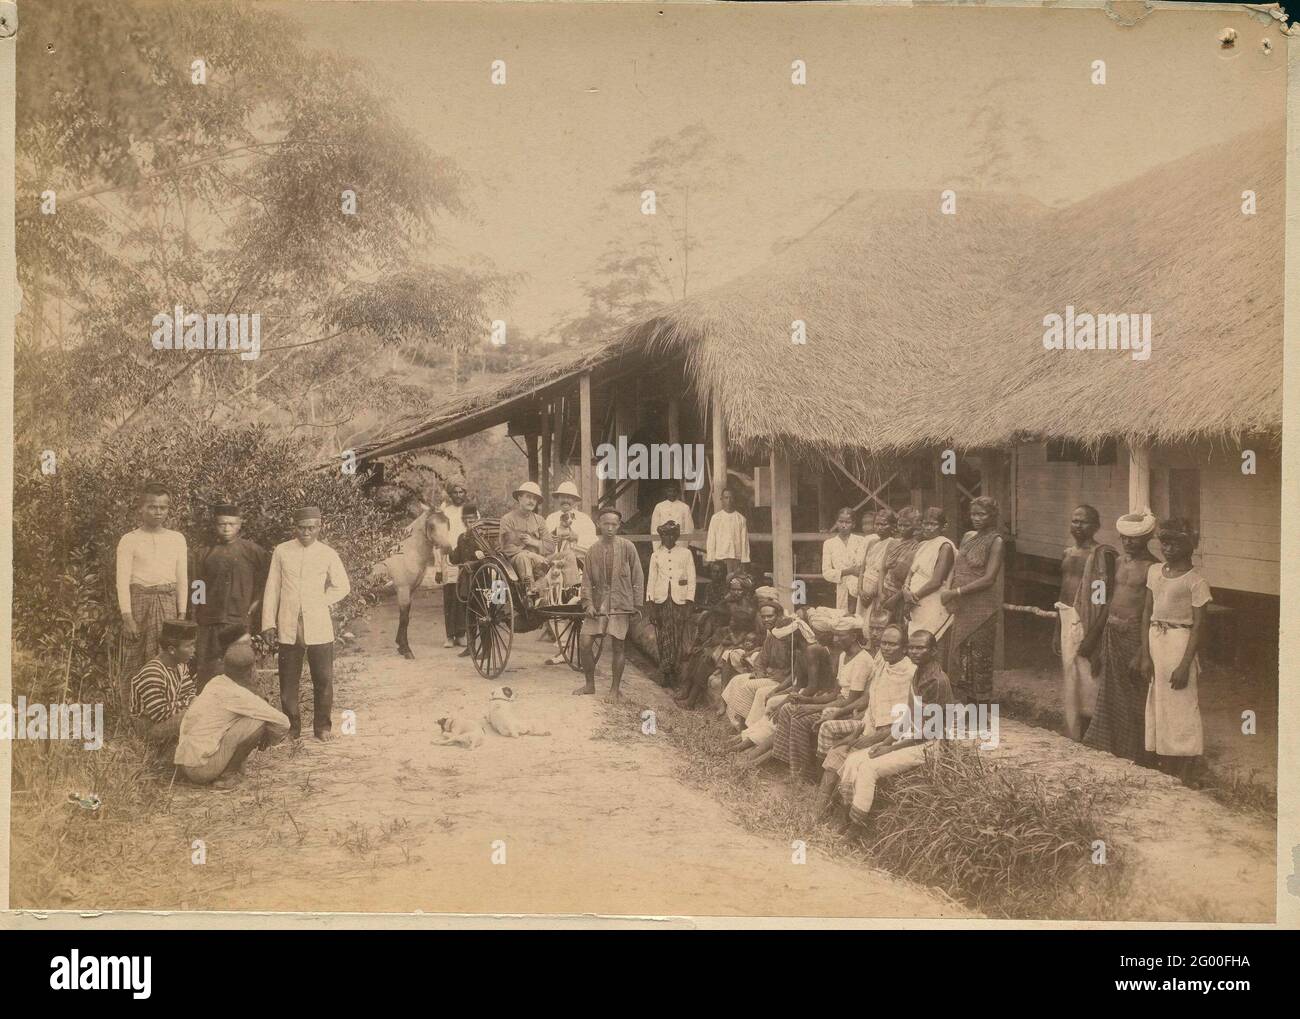 Contract workers and supervisors for cooling accommodation. Rickshaw with European supervisors and 'Holz-Pony' with Europeans for accommodation of coolie's with the workers posing, Long cat Sumatra Stock Photo